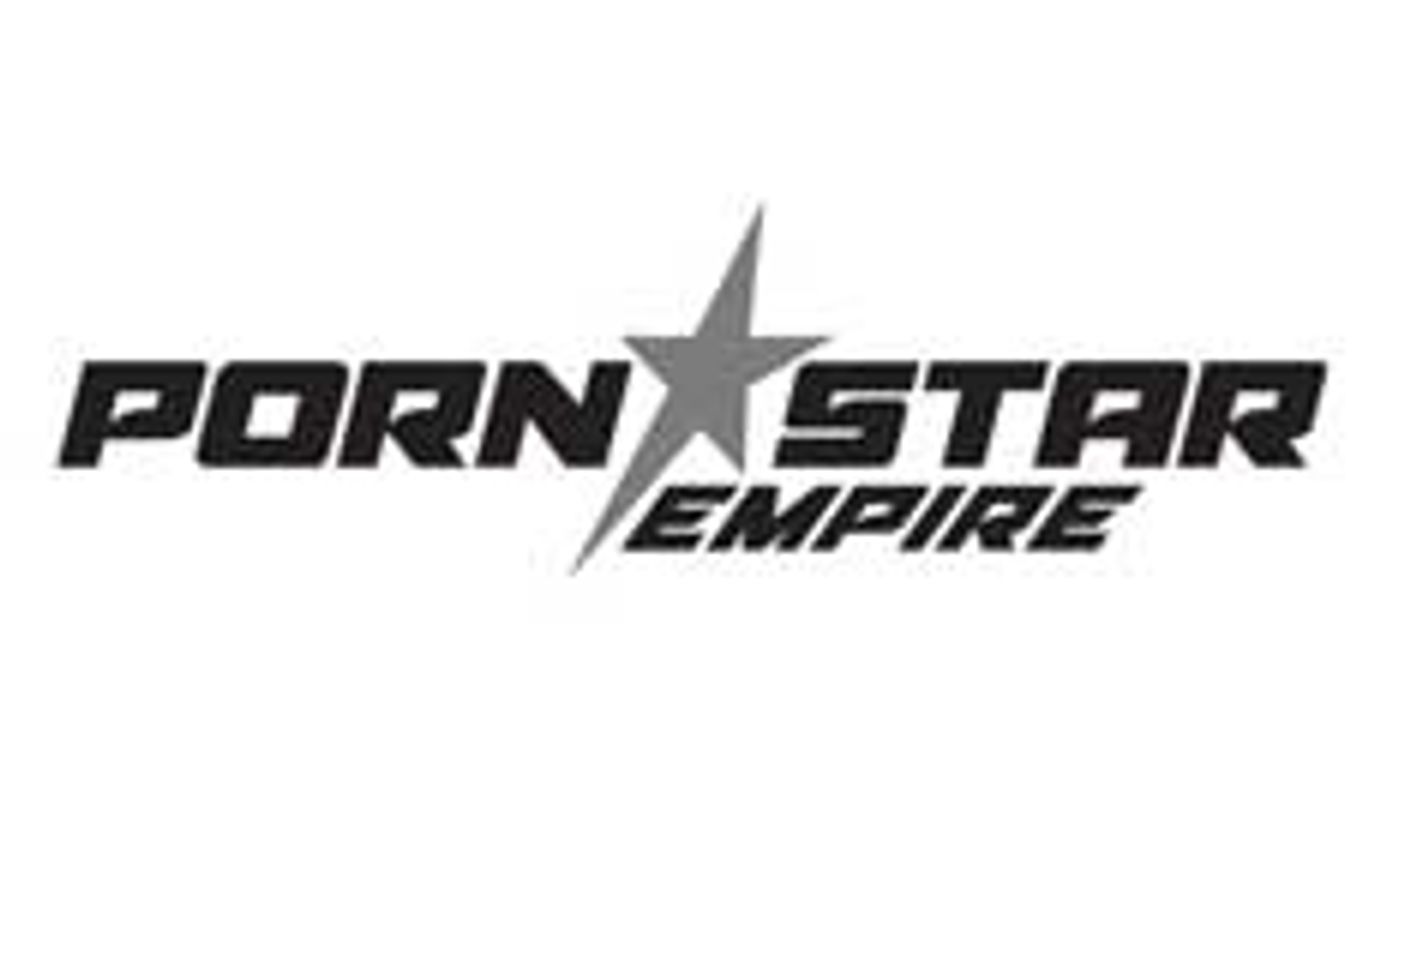 Scary Monsters and Super Freaks: 'Tricks & Treats' from Pornstar Empire